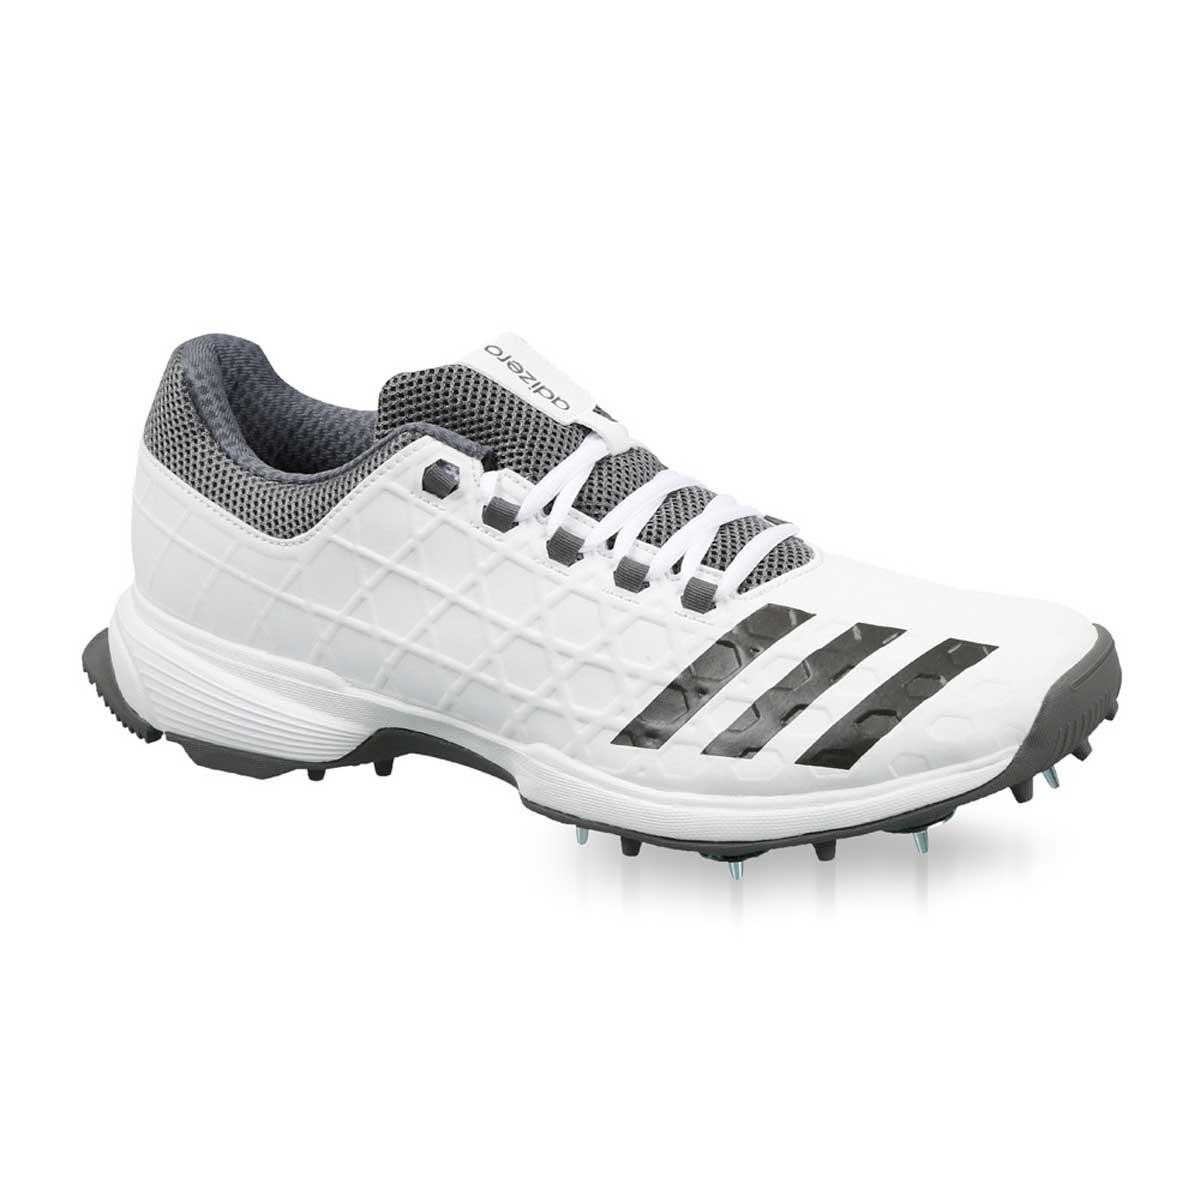 21  Adidas cricket shoes myntra Cheap Shoes